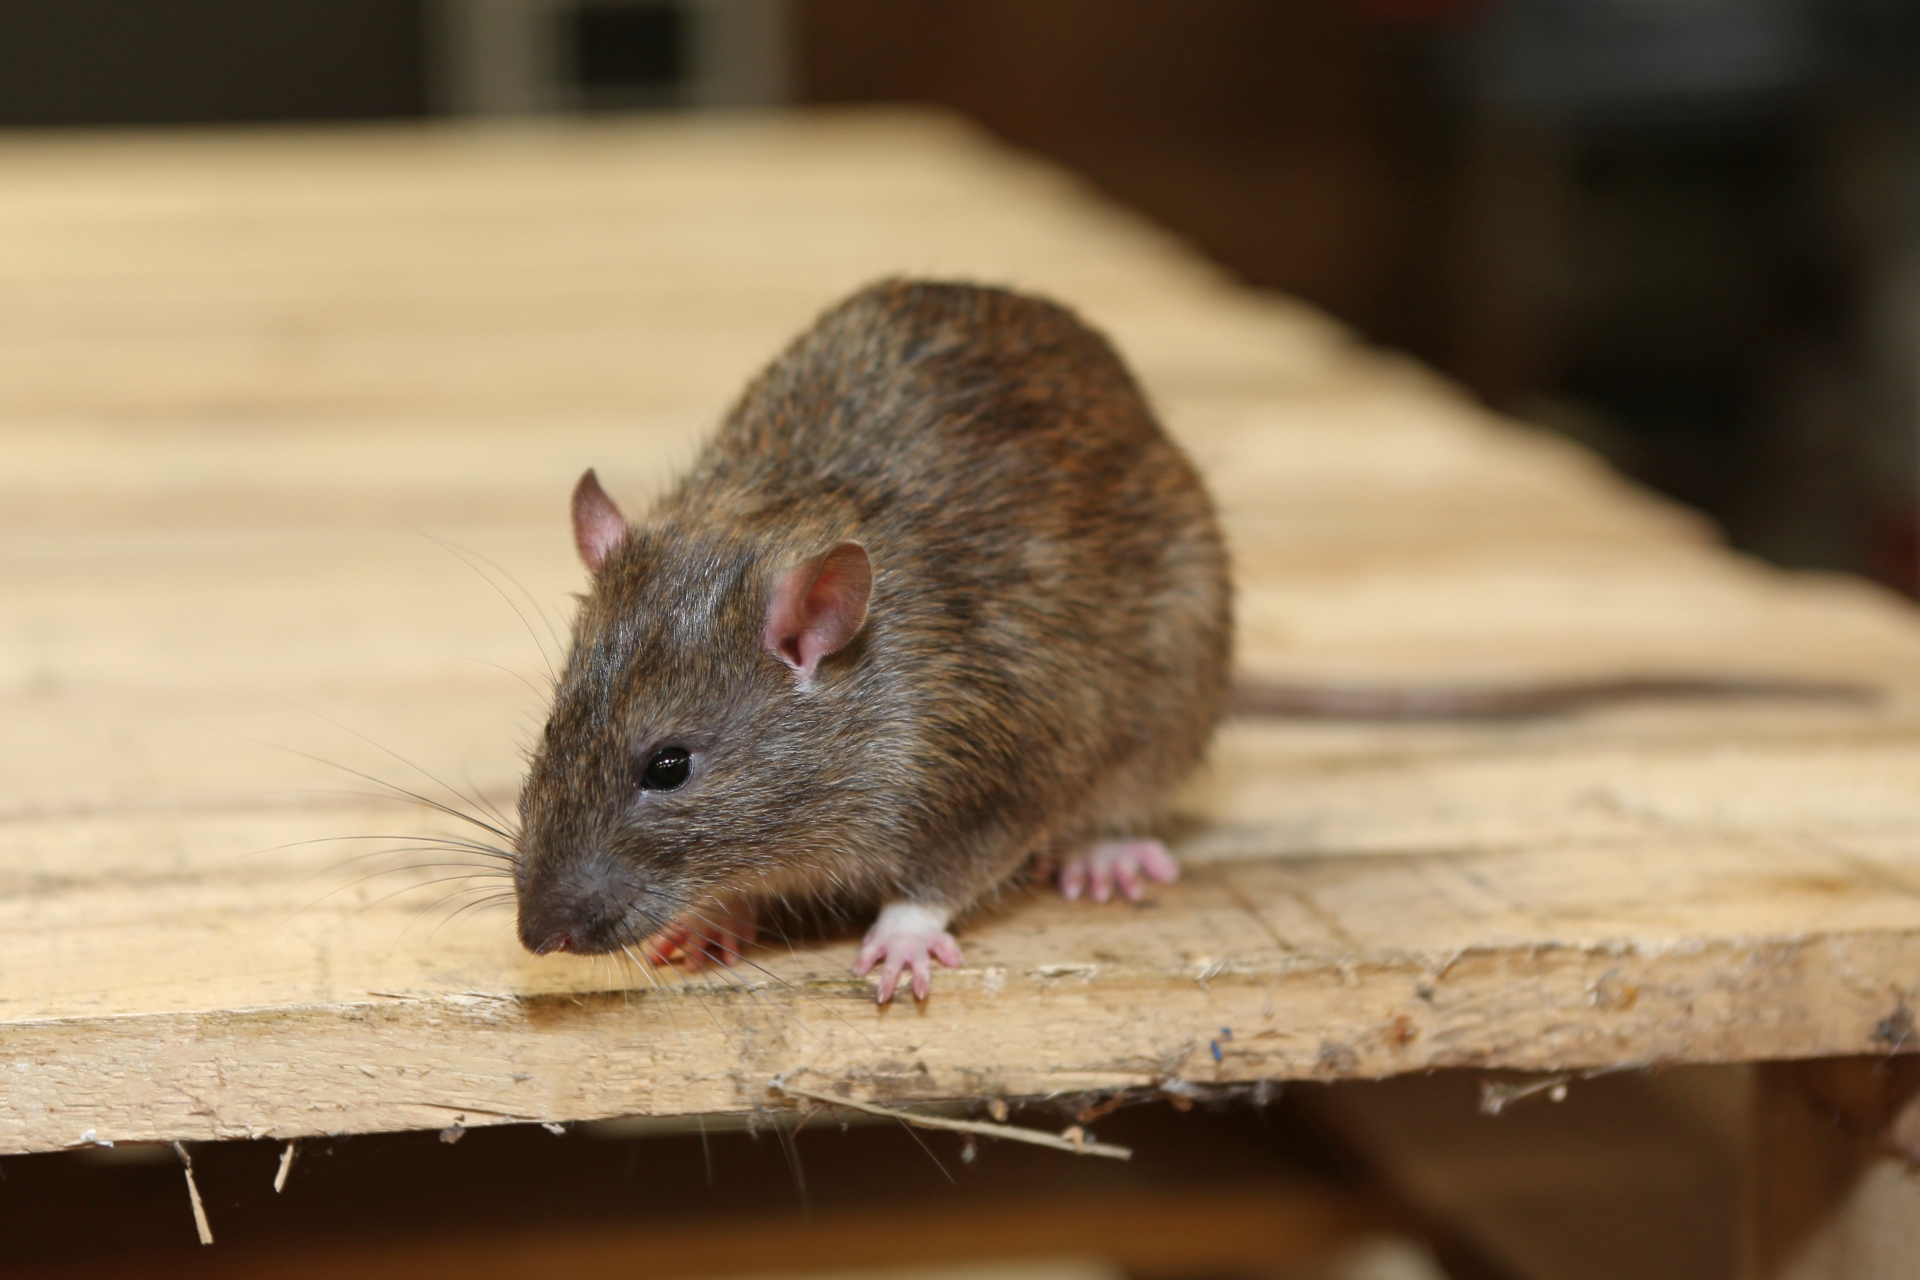 Rat extermination, Pest Control in Soho, W1. Call Now 020 8166 9746